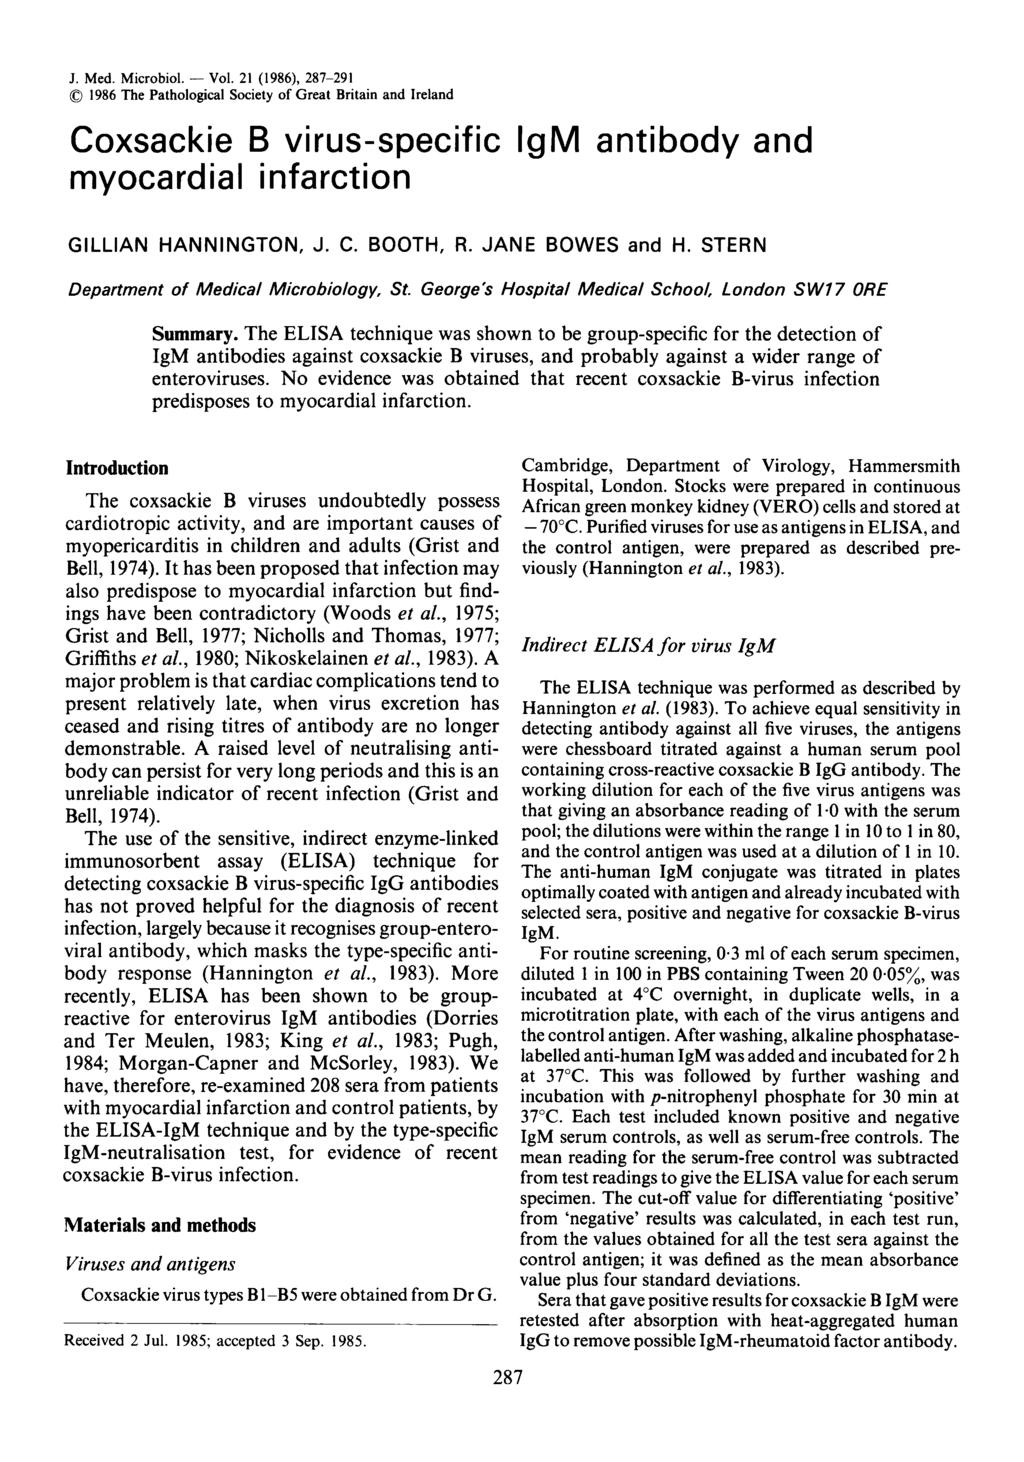 J. Med. Microbiol. - Vol. 21 (1986), 287-291 0 1986 The Pathological Society of Great Britain and Ireland Coxsackie B virus-specific IgM antibody and myocardial infarction GlLLlAN HANNINGTON, J. C. BOOTH, R.